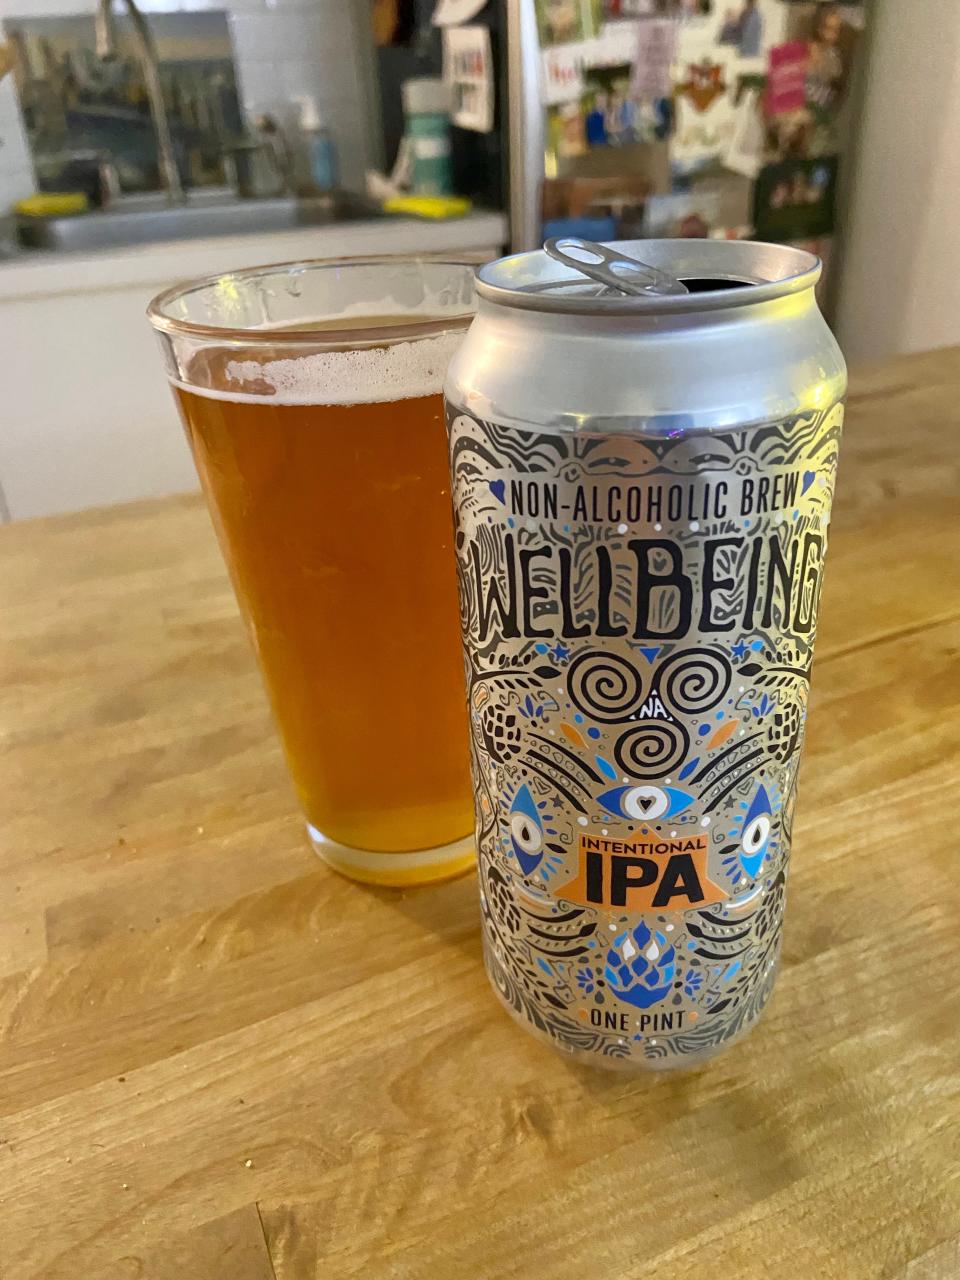 Wellbeing IPA nonalcoholic beer in glass and can